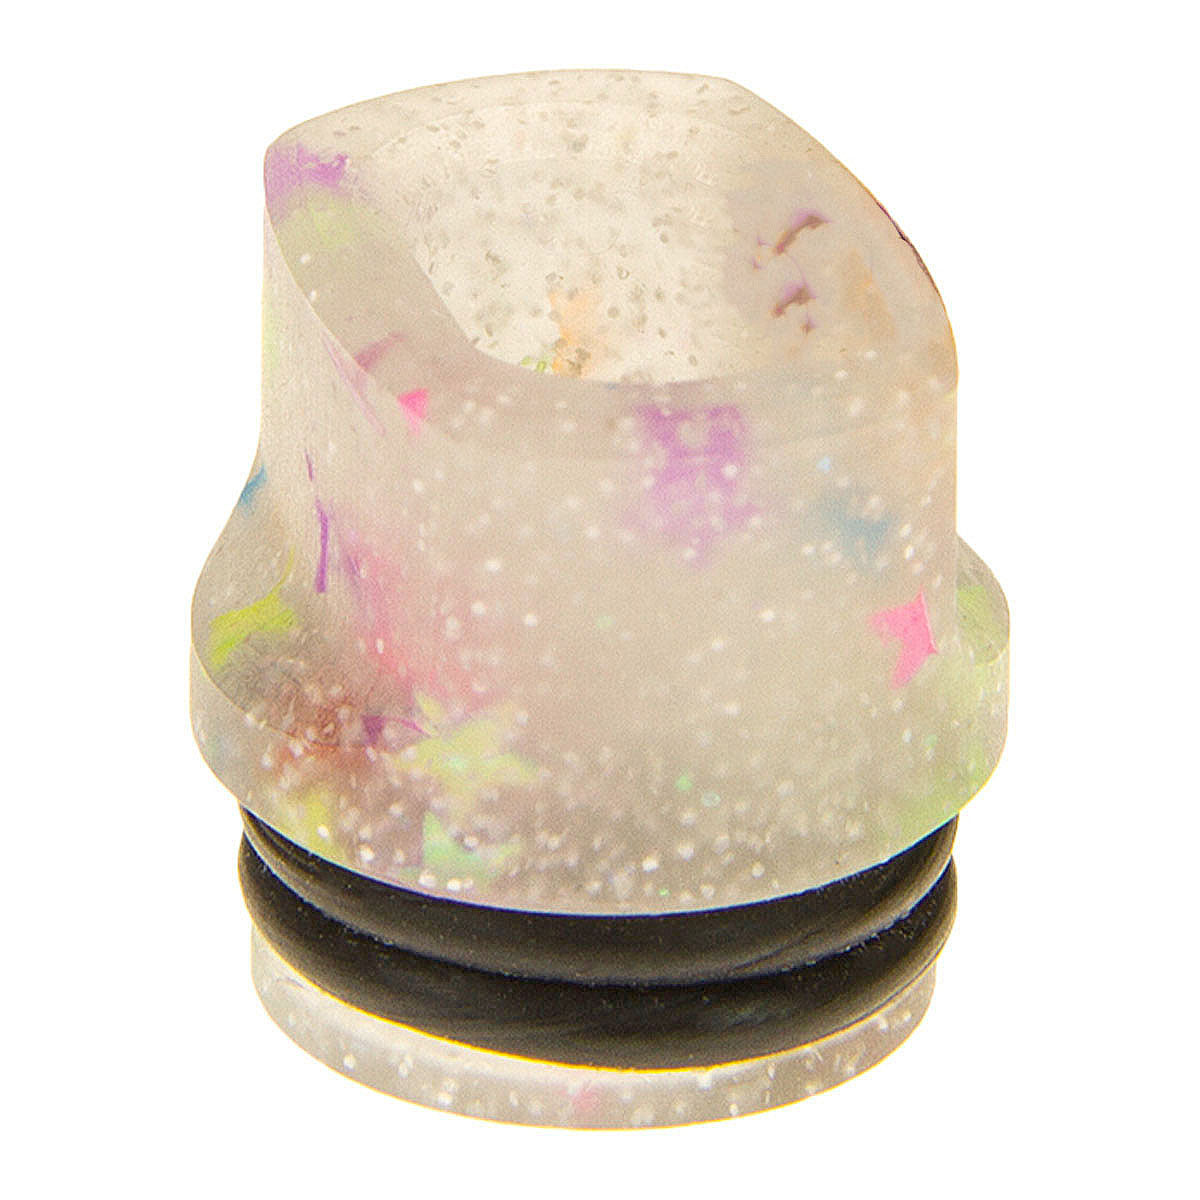 Unicorn Poop (glow in the dark) Whistle Tip by Double Helix Designs